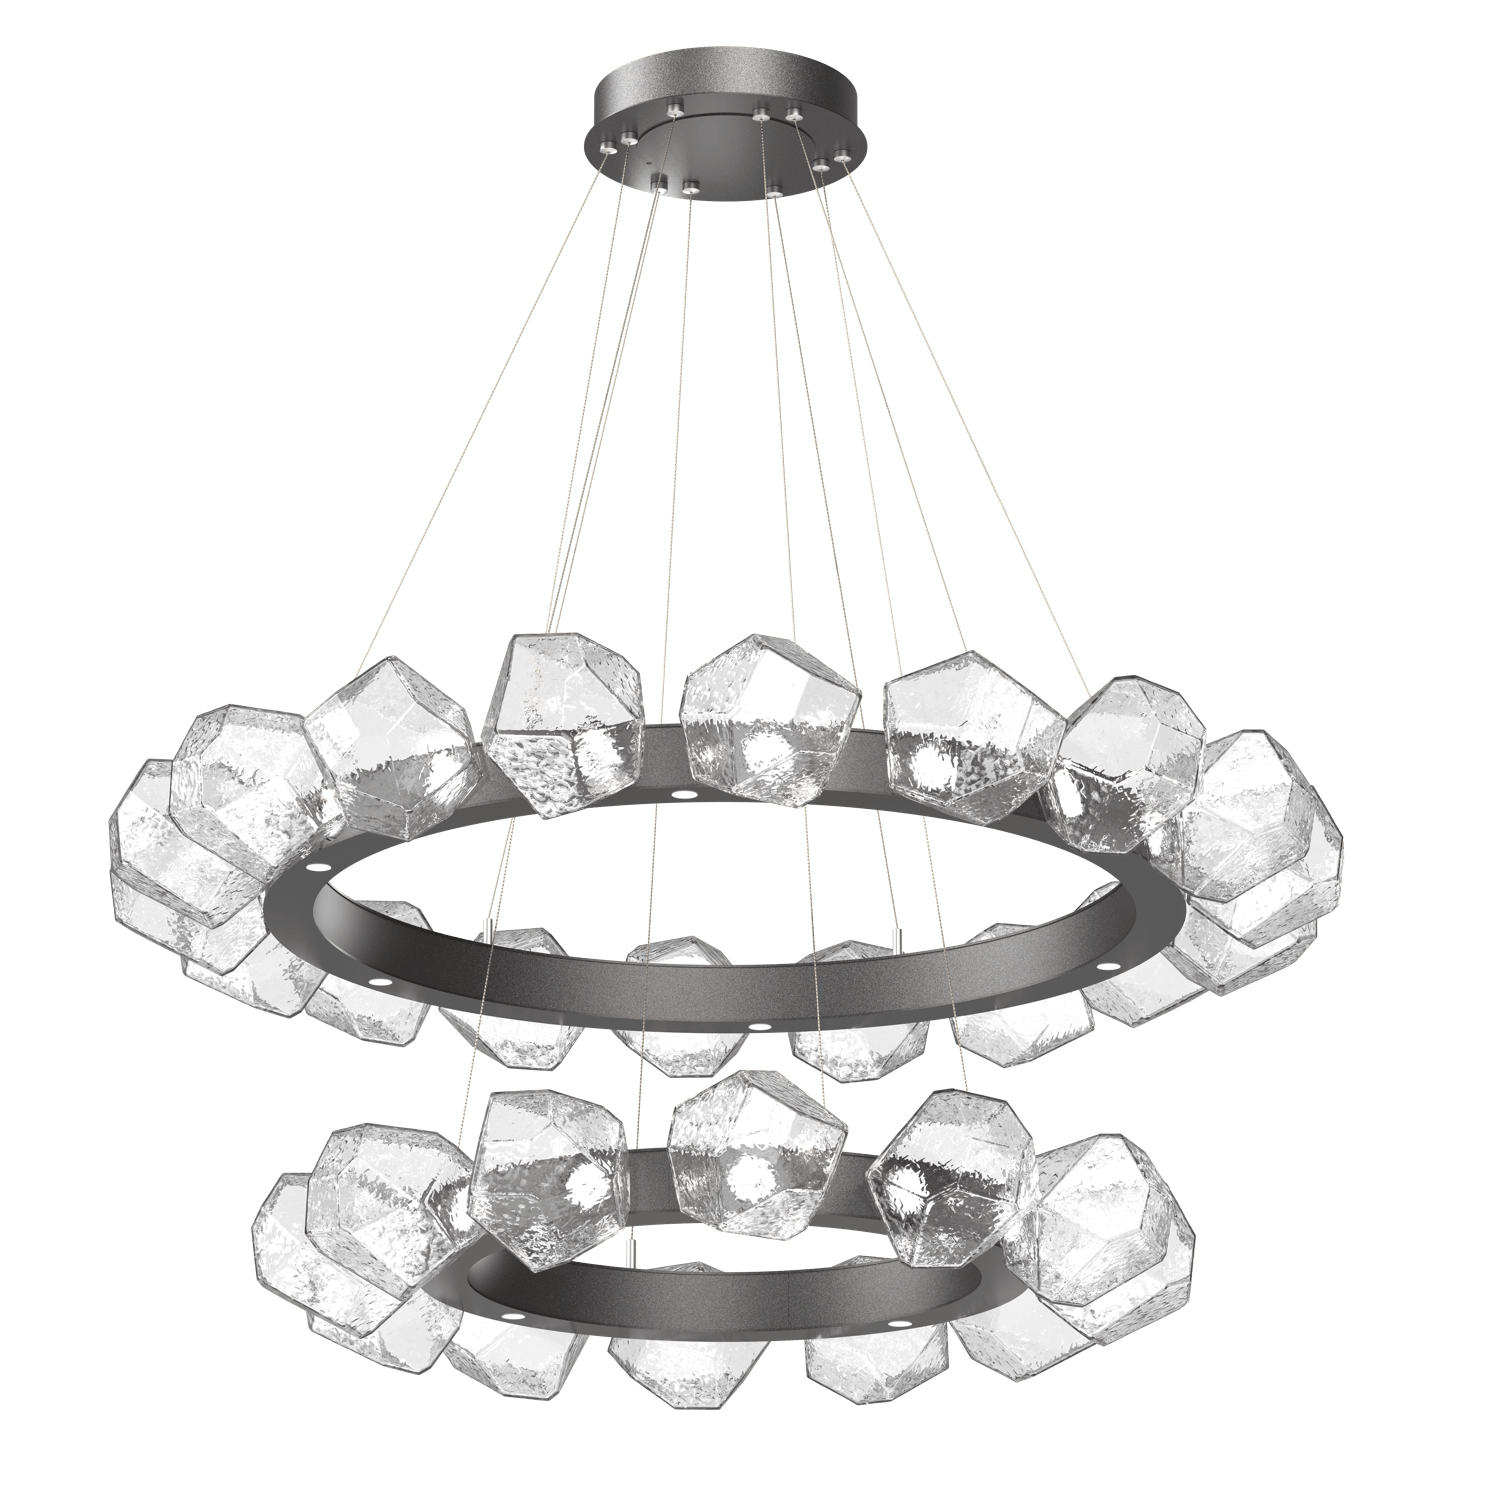 CHB0039-2T-GP-C-Hammerton-Studio-Gem-48-inch-two-tier-radial-ring-chandelier-with-graphite-finish-and-clear-blown-glass-shades-and-LED-lamping